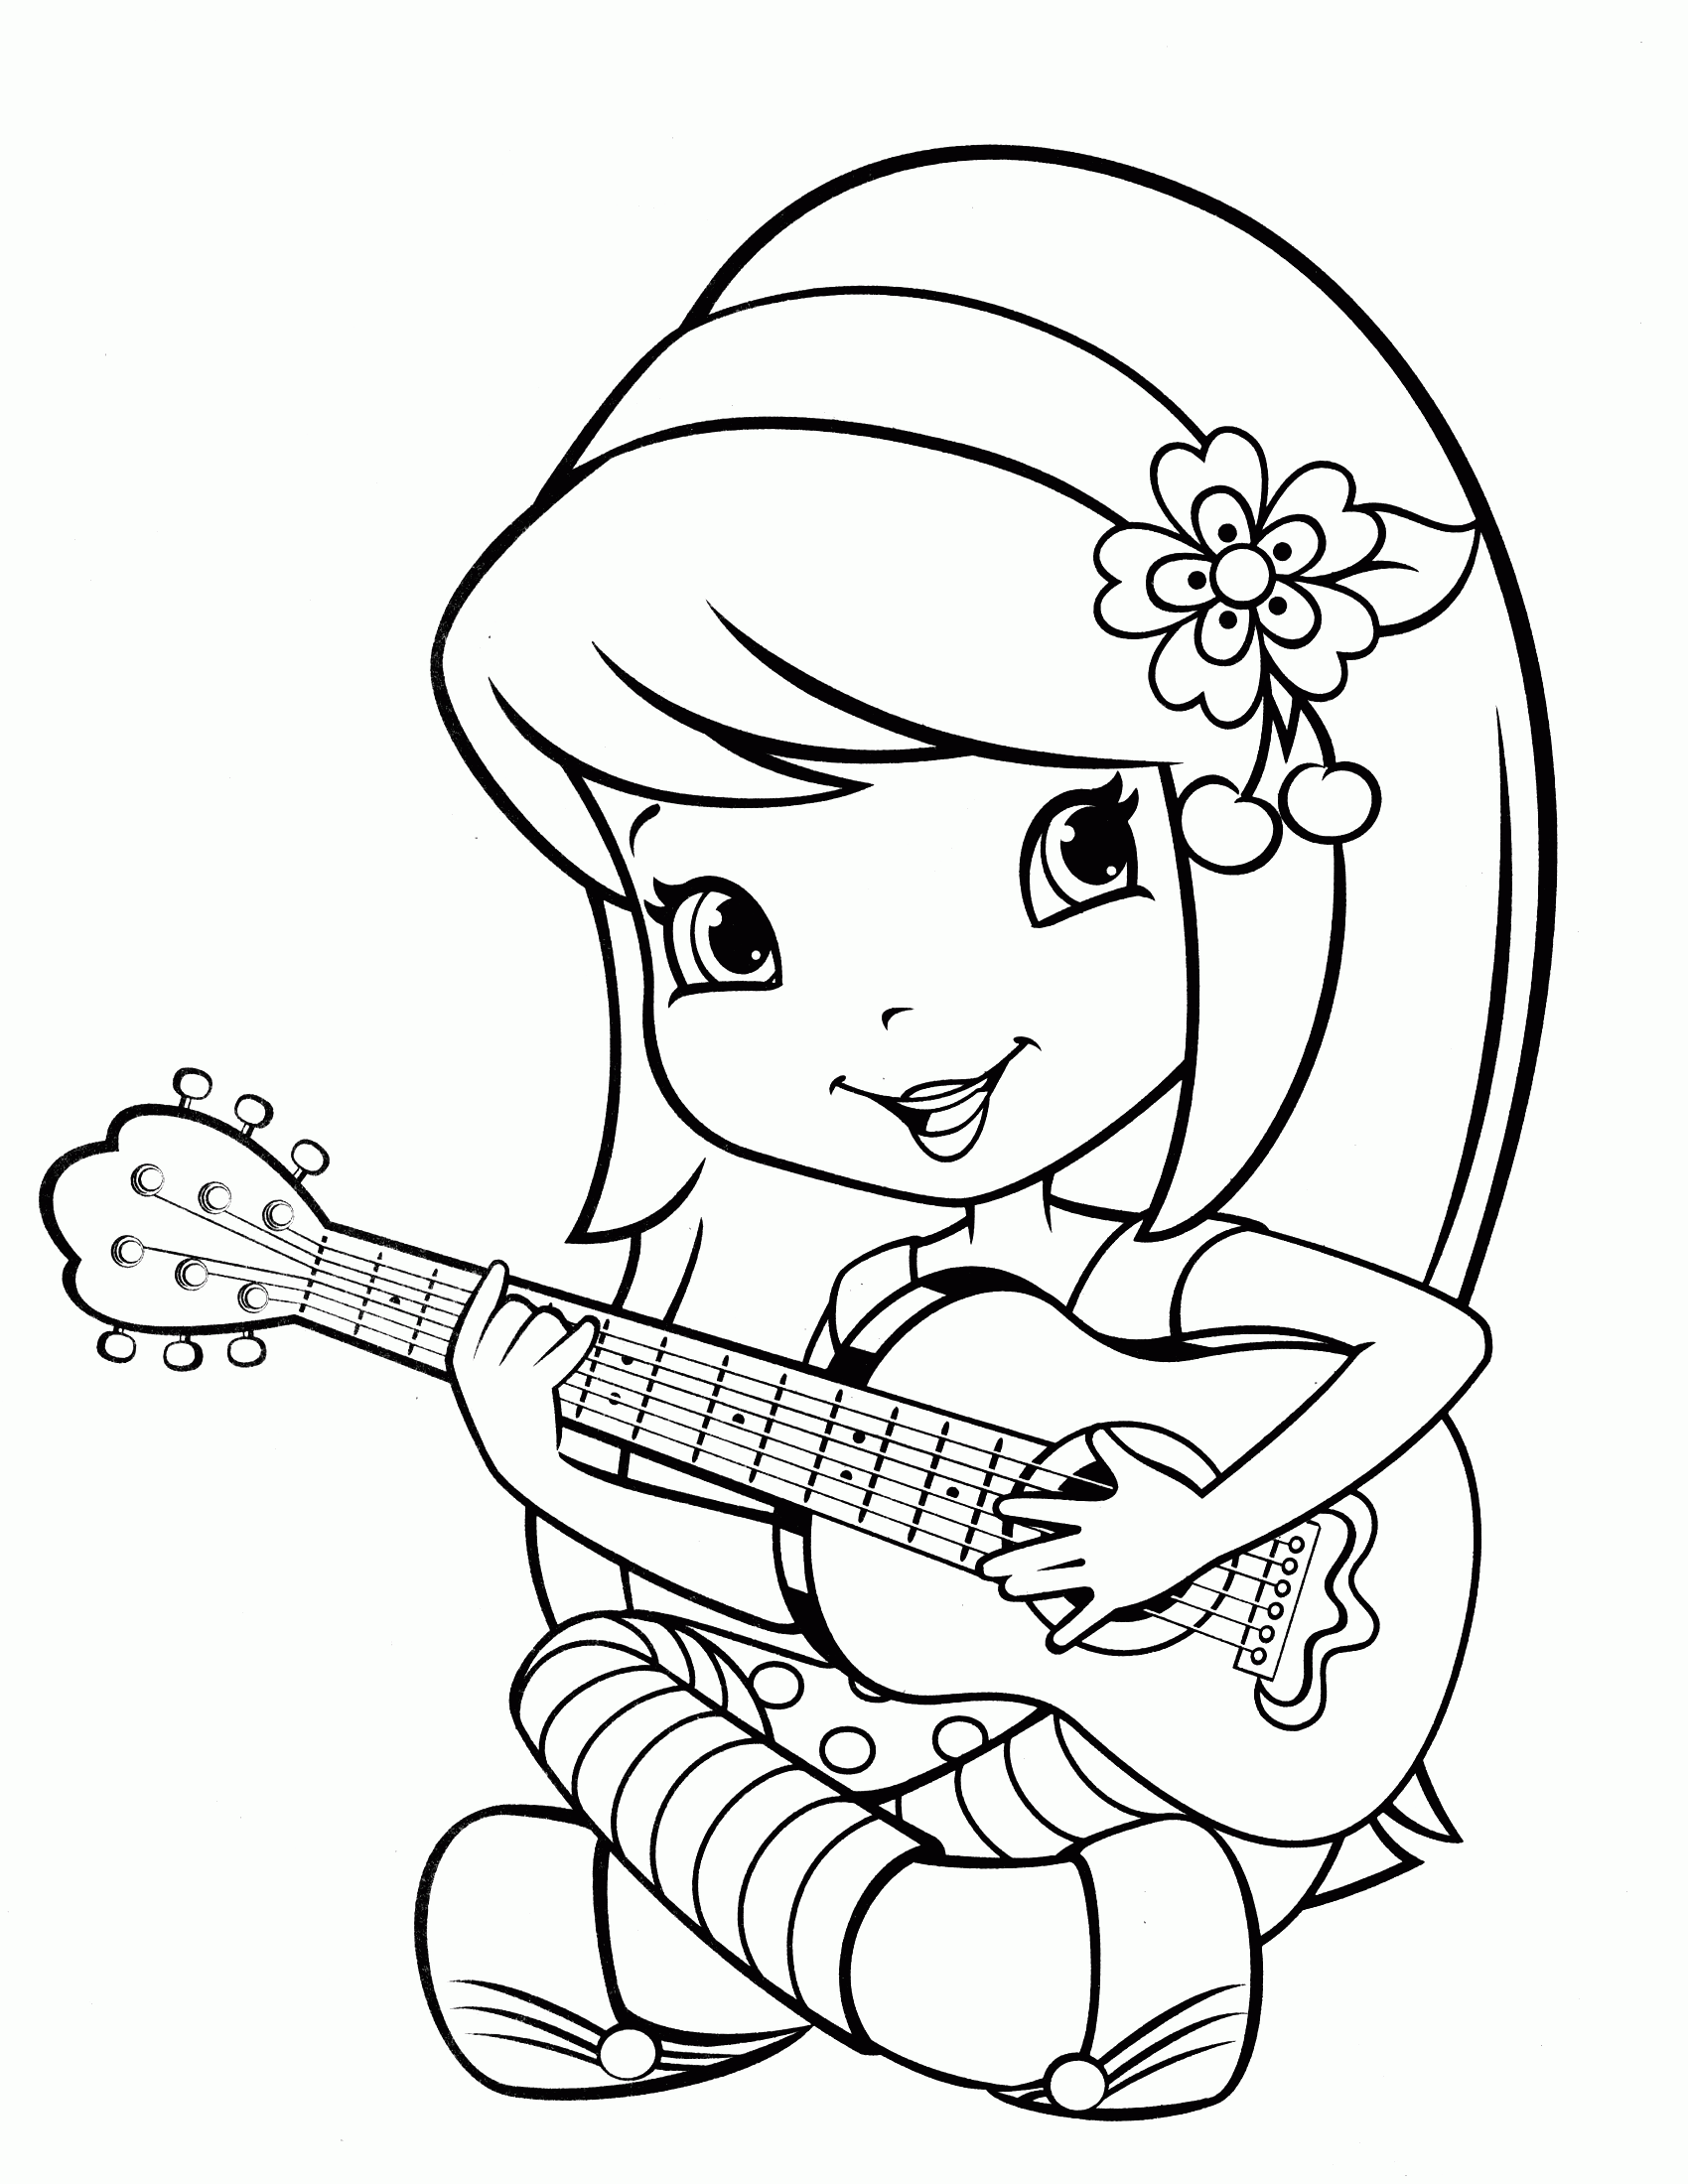 Coloring Pages Of Strawberry Short Cake - Coloring Home